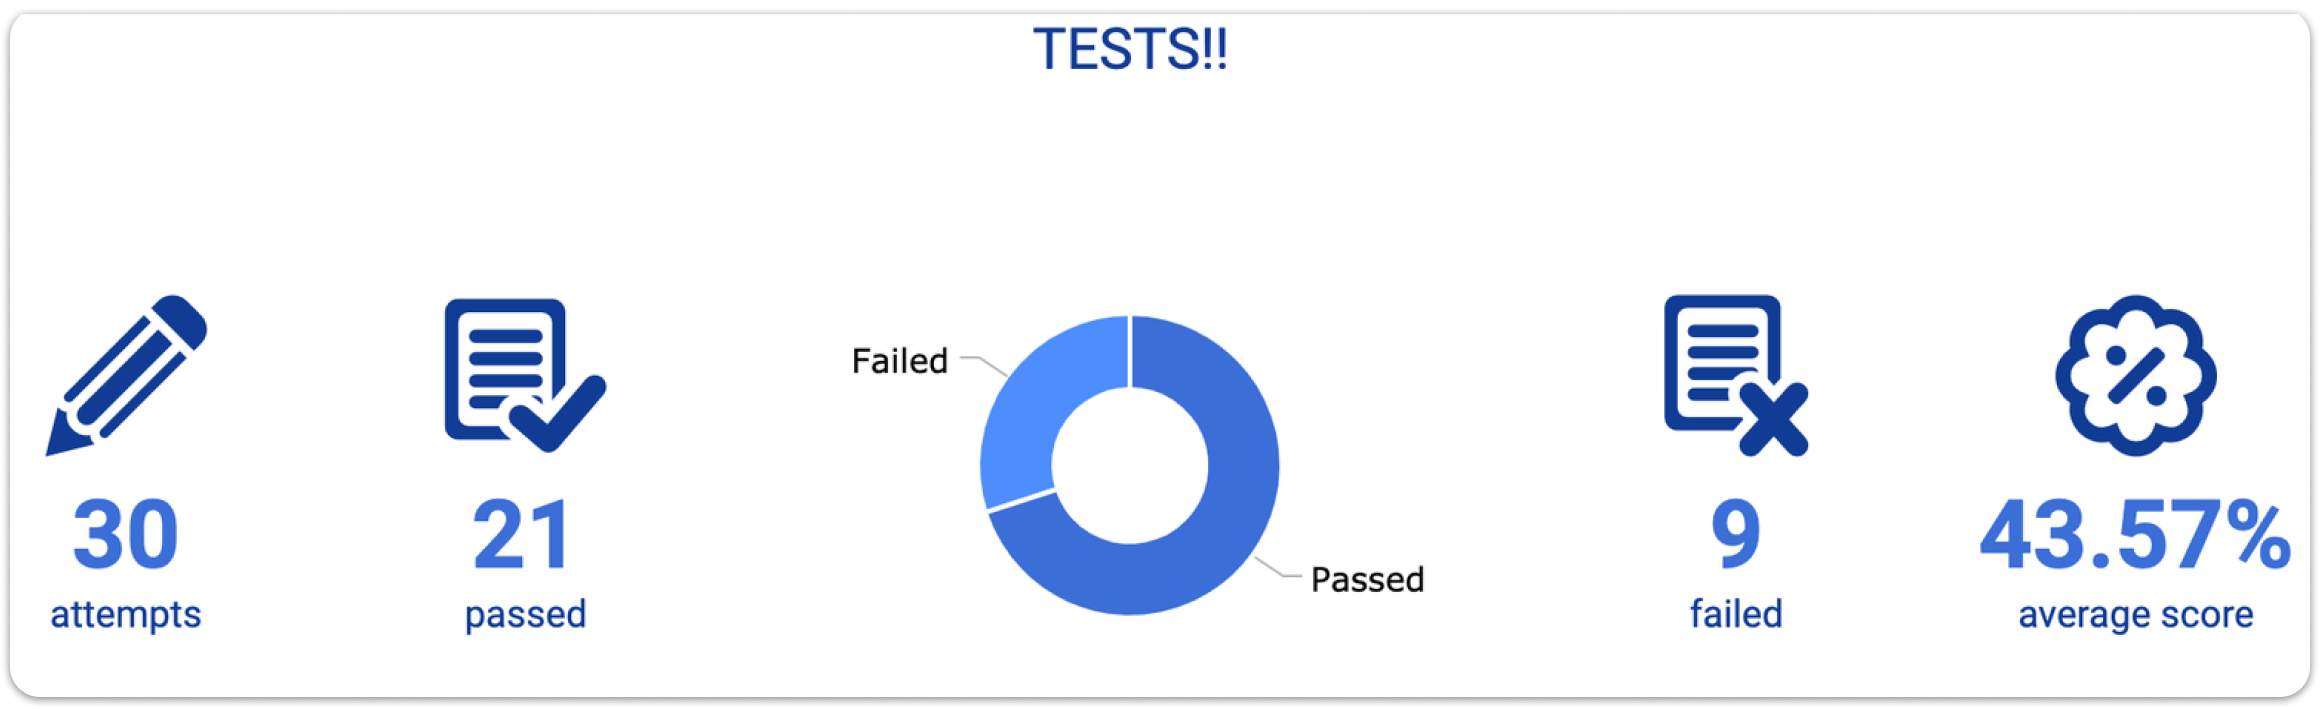 info_tests_rdy.png